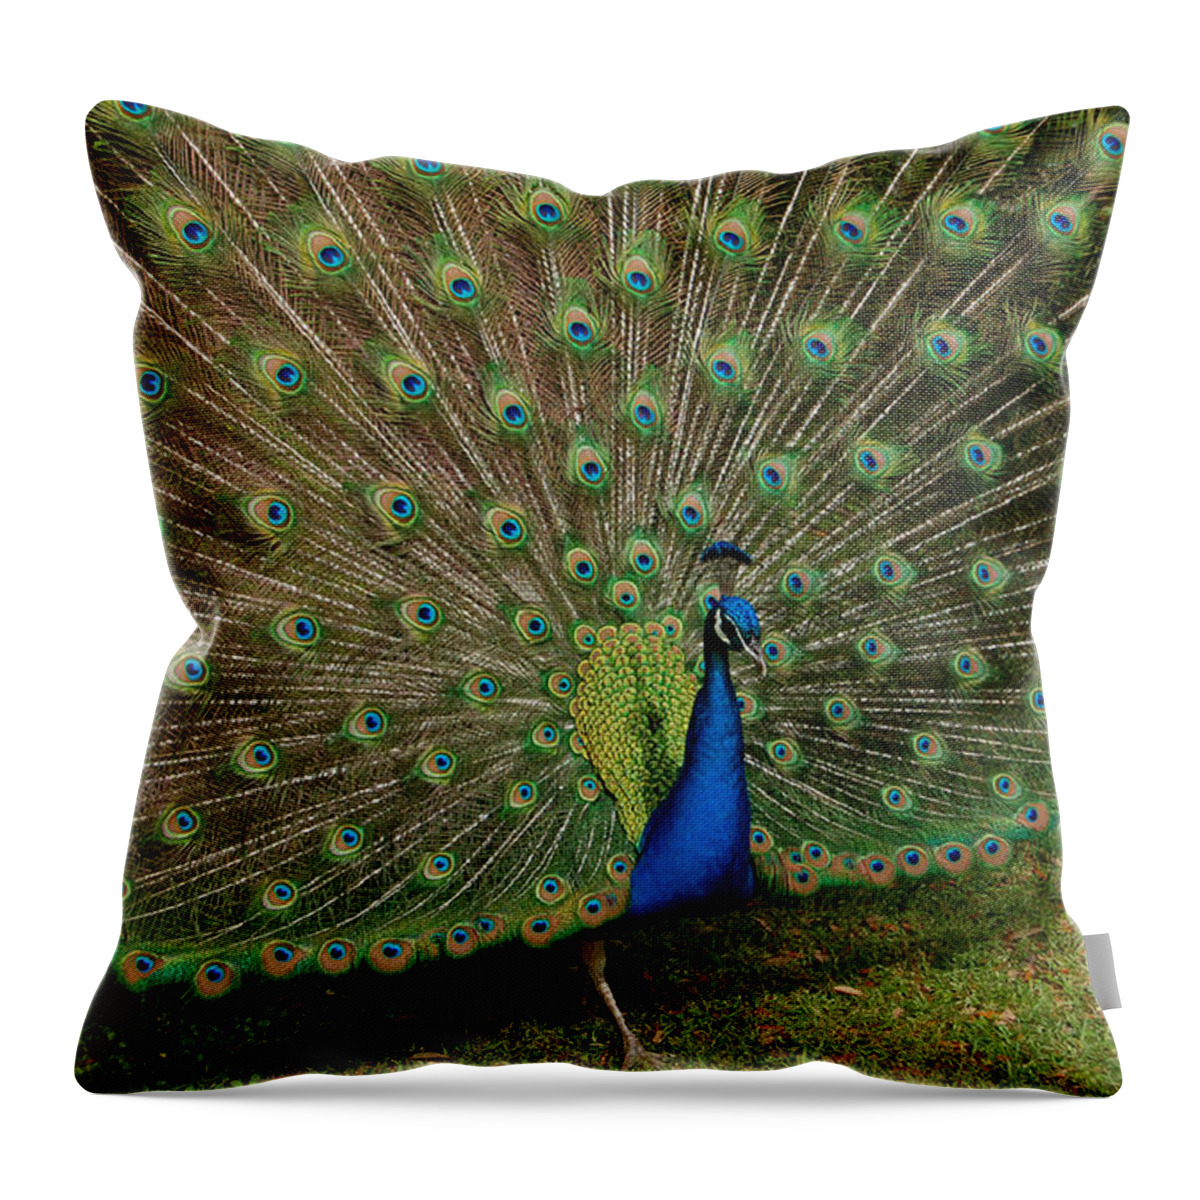 Peacock Throw Pillow featuring the photograph Its All About Him by Suzanne Gaff